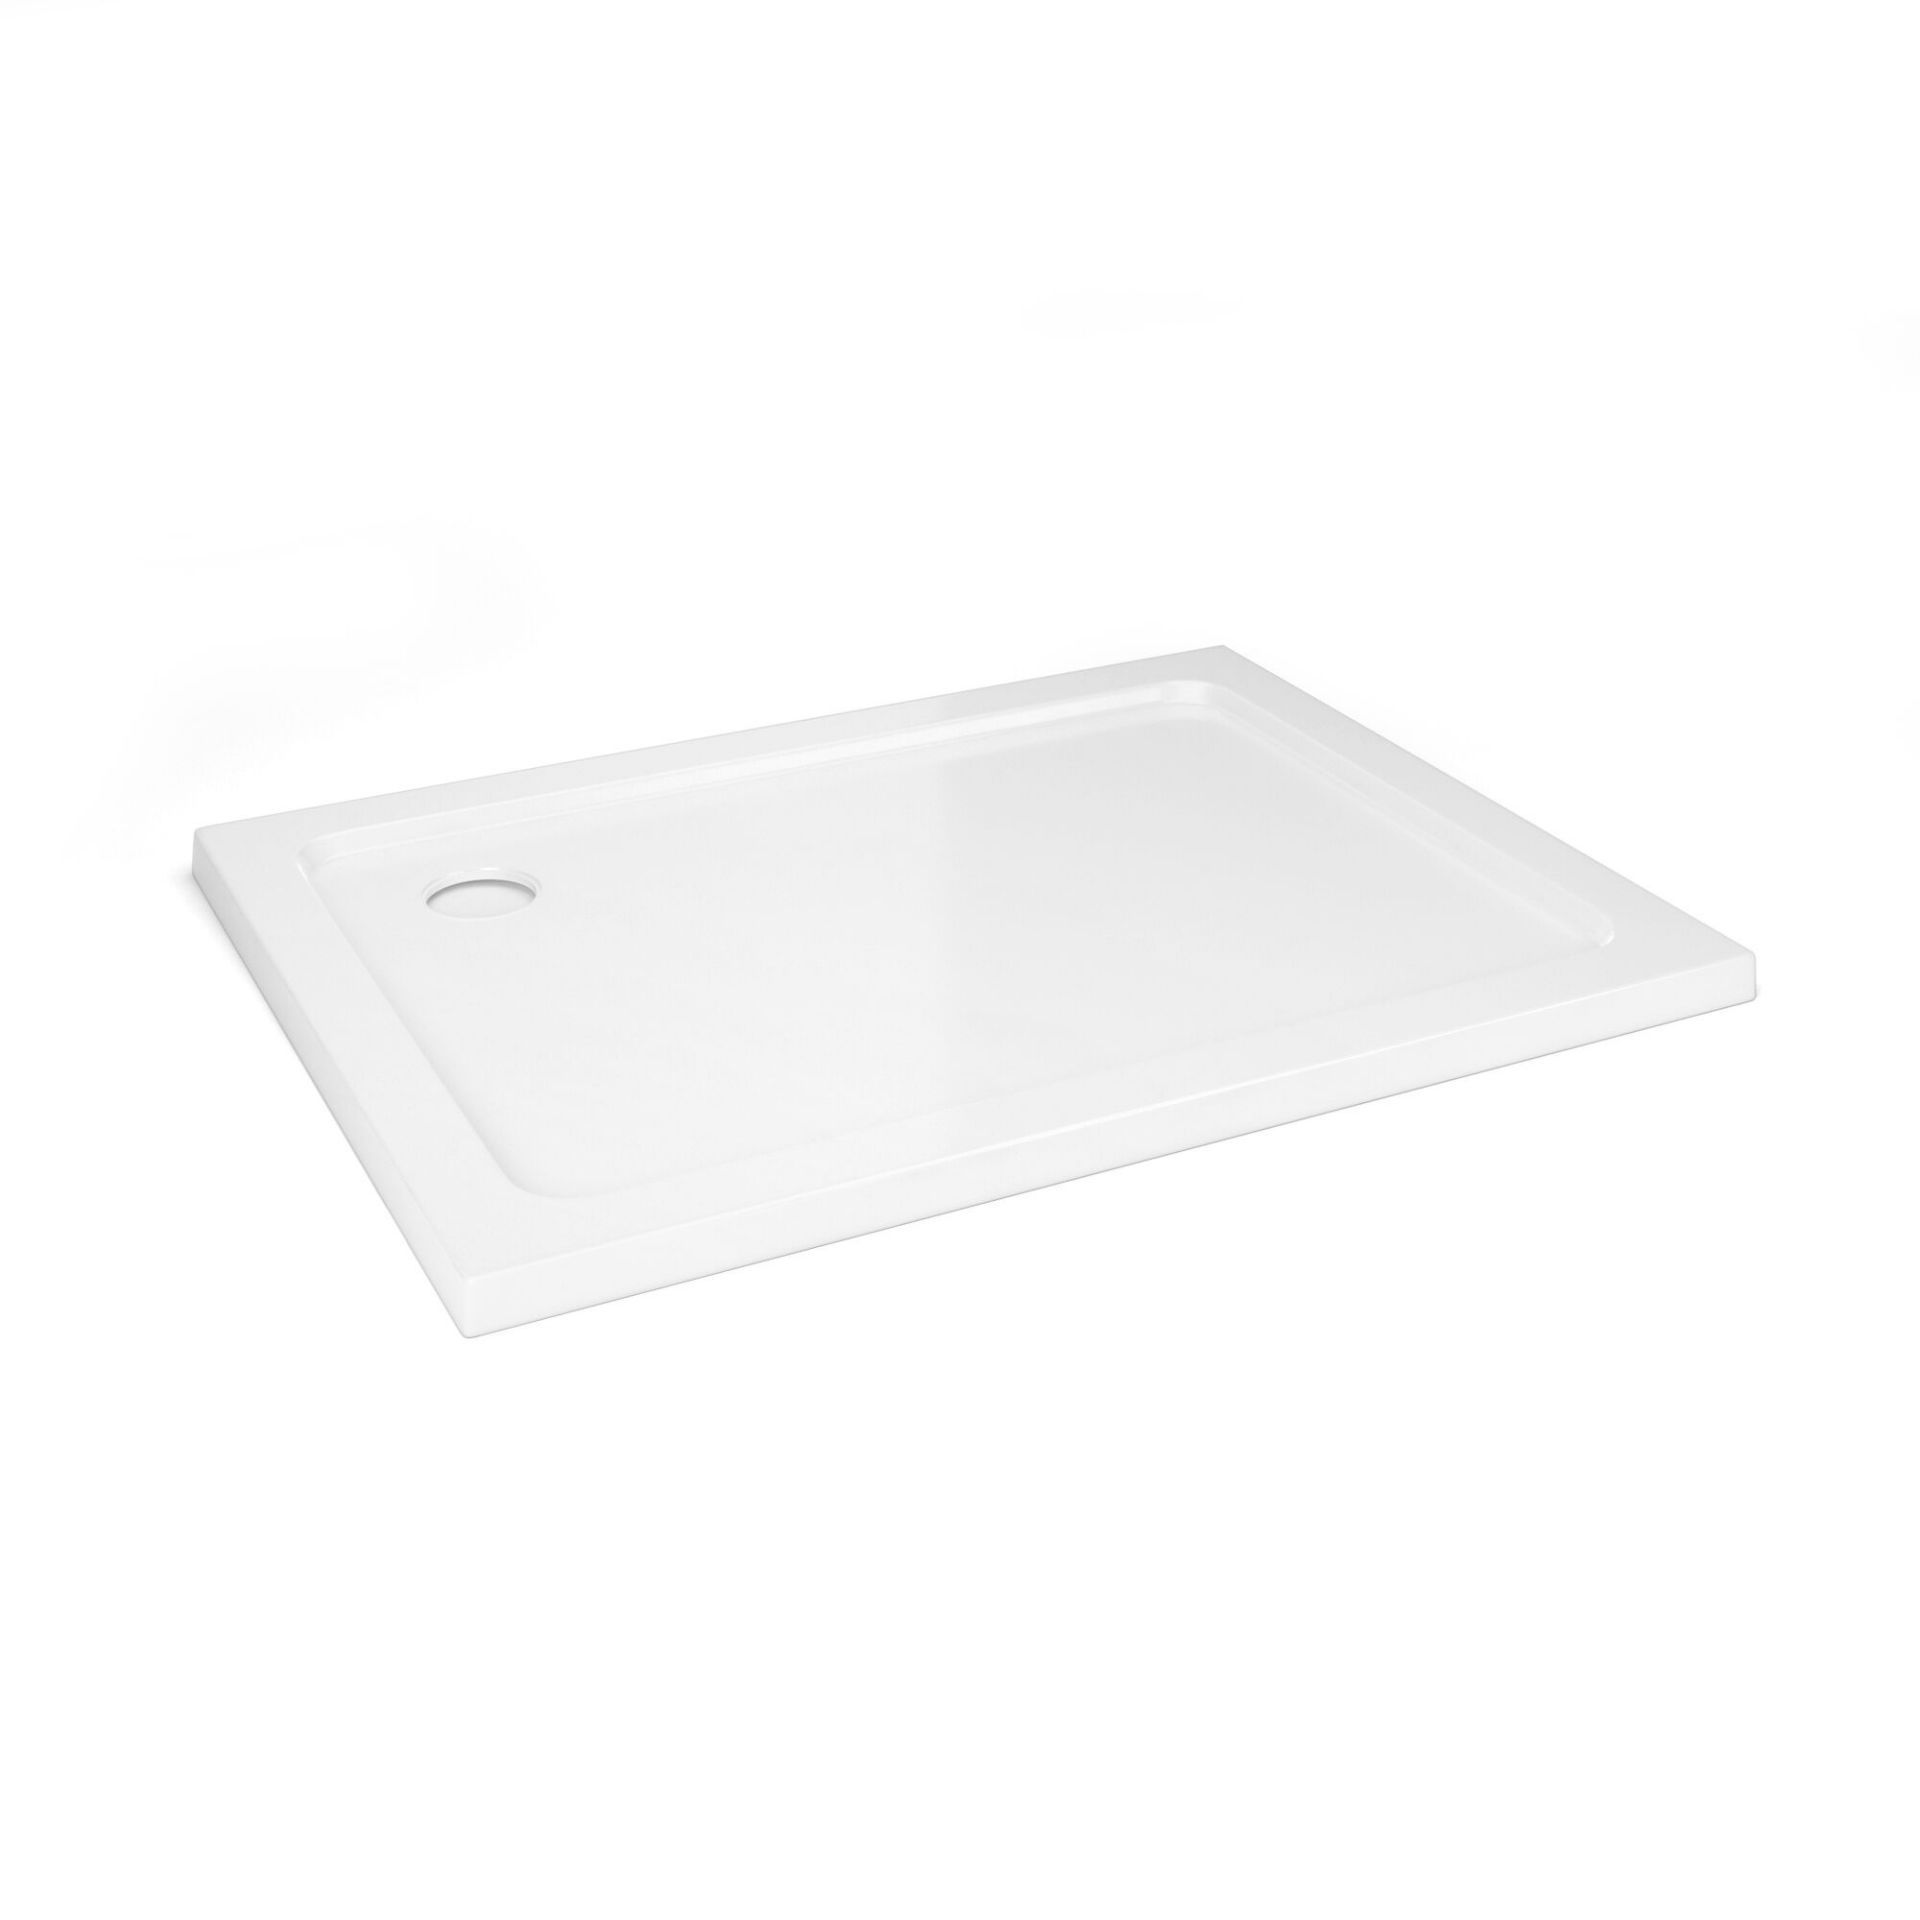 NEW (E60) 1000x900mm Rectangular Stone Shower Tray - Ultra Slim.RRP £299.99.Low profile ultra ... - Image 2 of 2